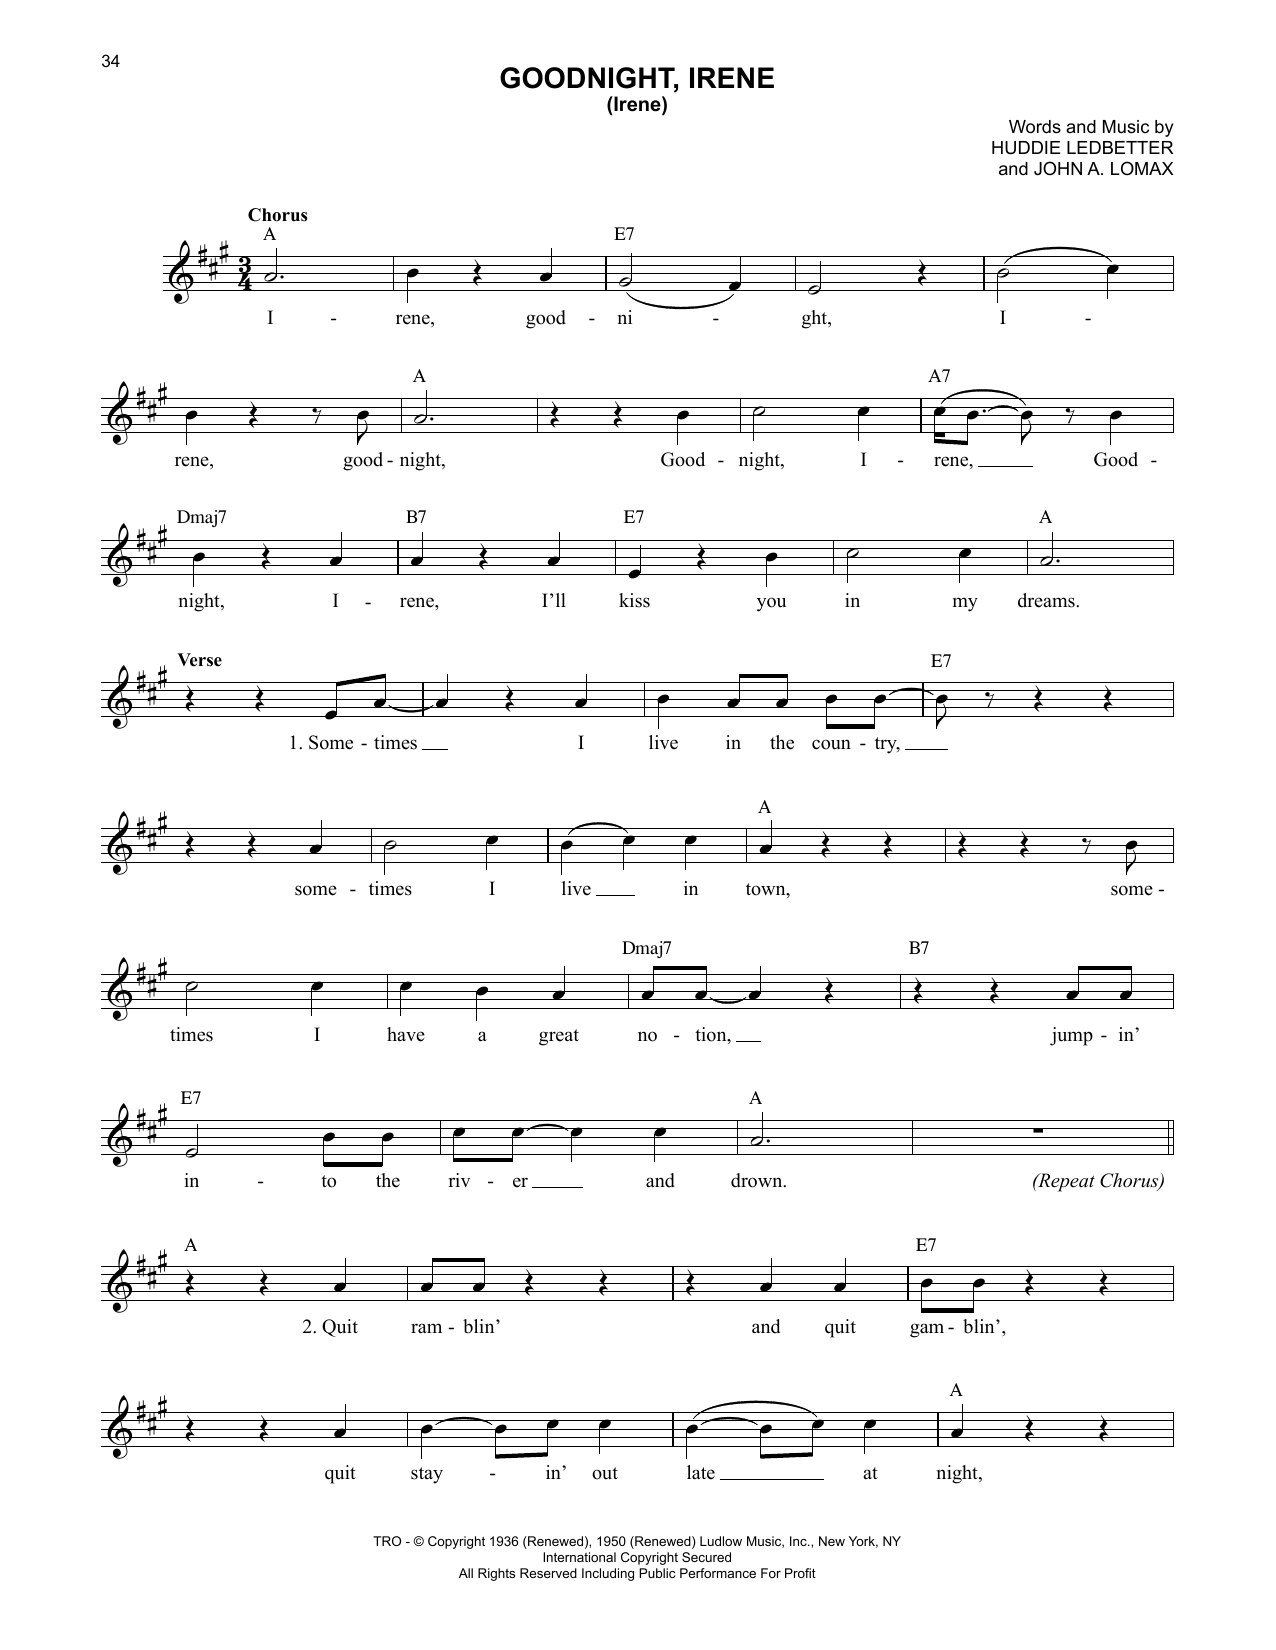 Download Lead Belly Goodnight, Irene Sheet Music